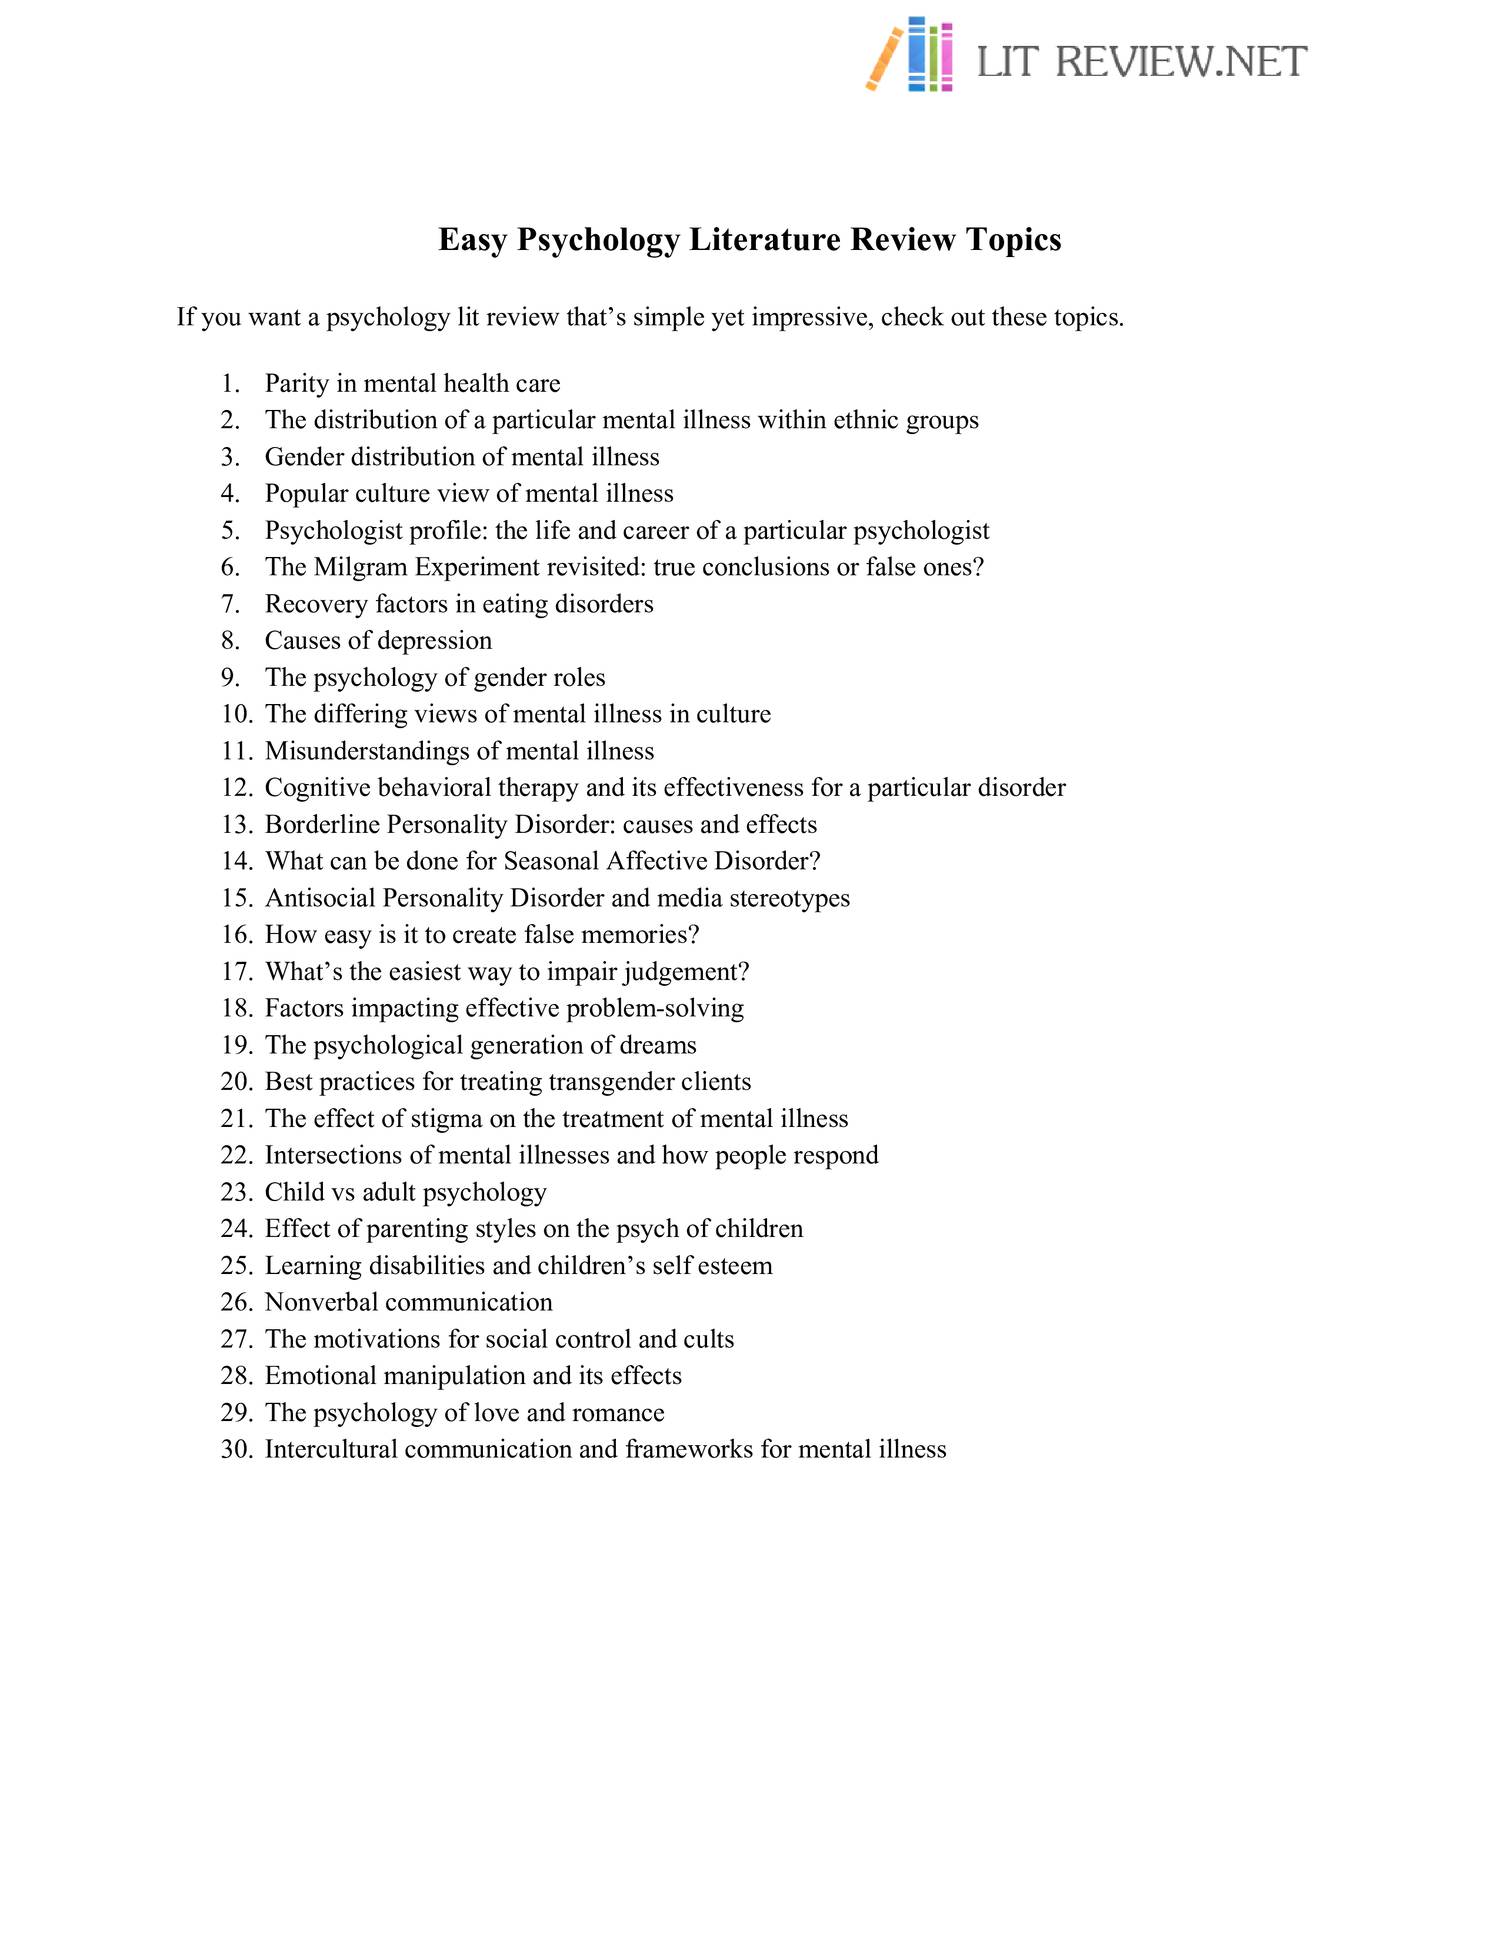 psychology research topic list